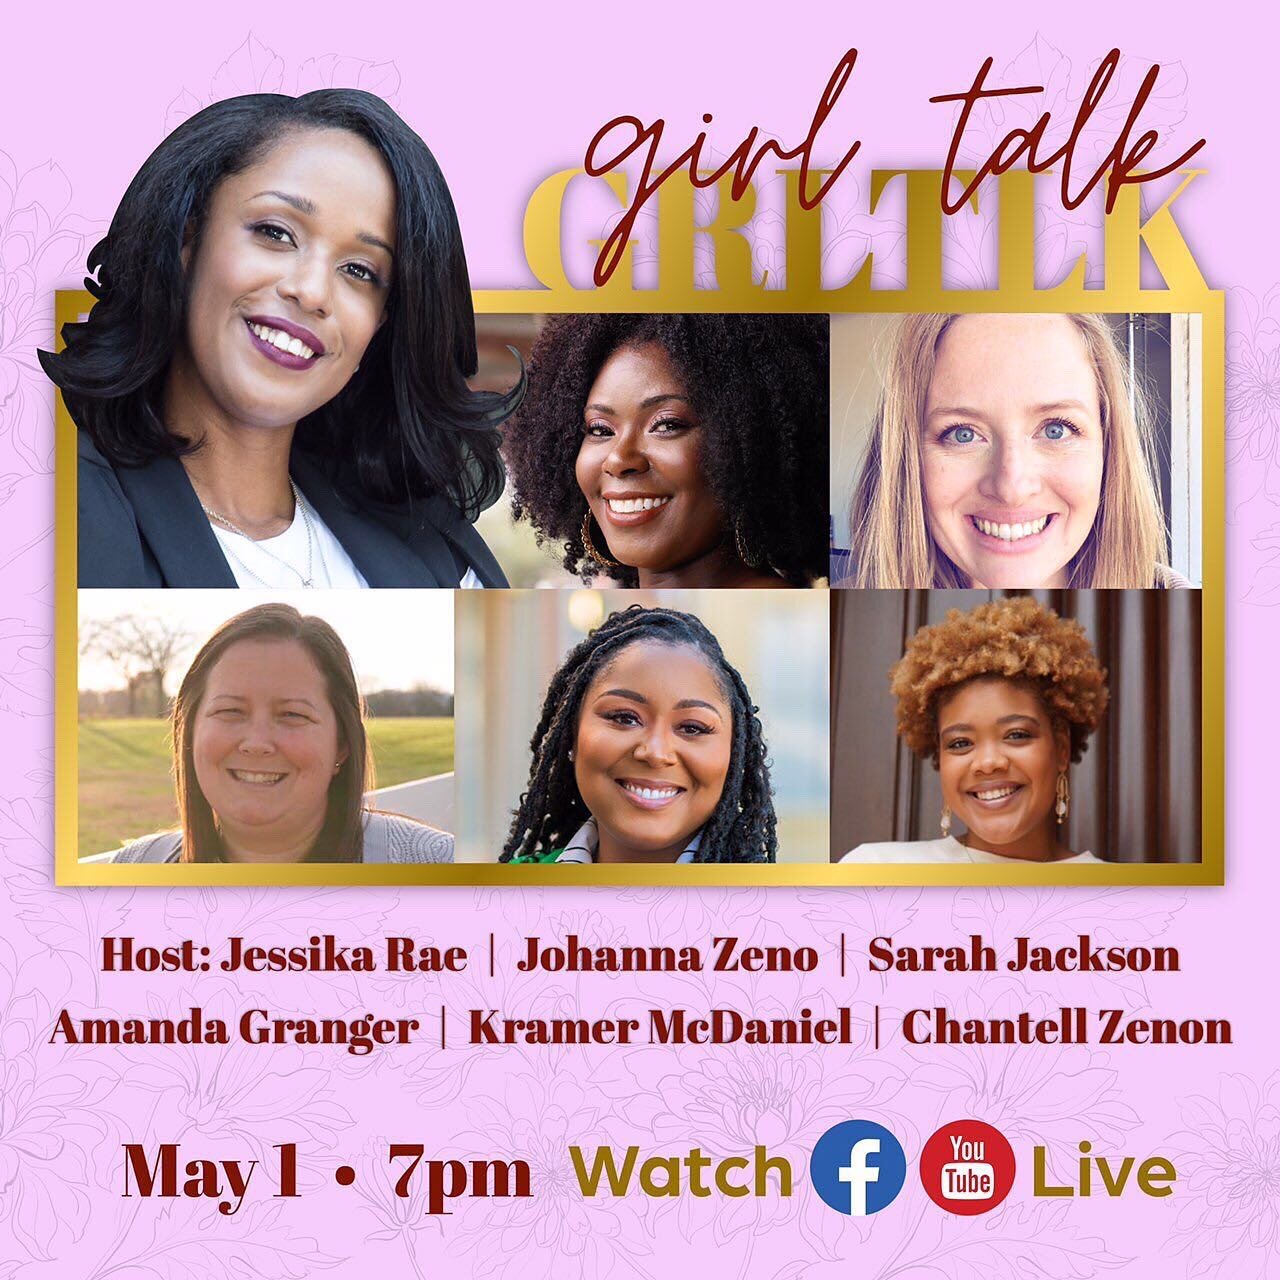 Guess what today is!! Part 1 of GRLTLK 🙌🏽❤️ Tune in tonight! Grab a snack and text your girlfriends to join you&hellip; links to my Facebook and YouTube are in my bio..see you soon! 😎 #FaithInEverySeason #FaithInEveryCircumstance #girltalk #GRLTLK